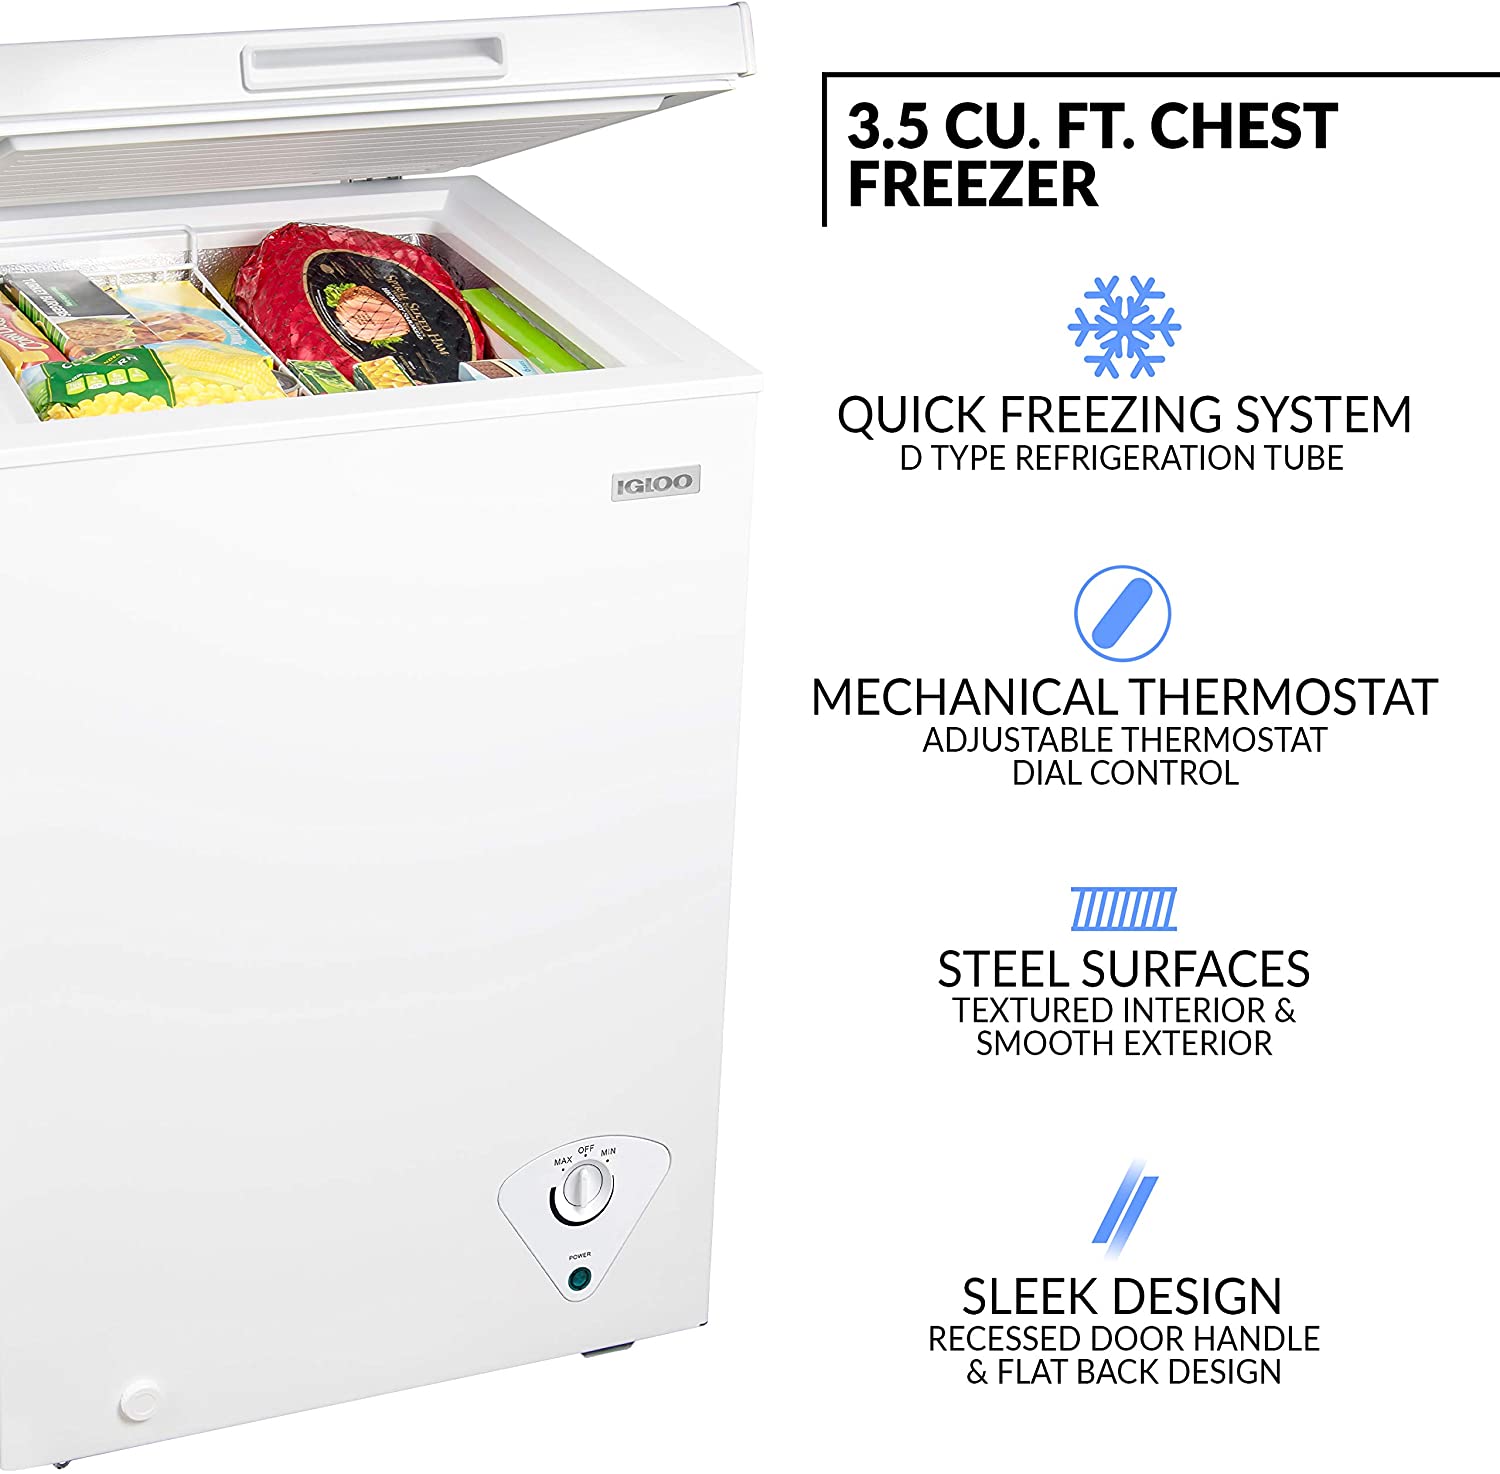 10 Best 3.5 Cu Ft Small Chest Freezer 2022 Review: Extra Storage Solution for Frozen Foods All In One Cooling Gear Lab: Any Refrigerators Air Conditioners Freezers Ice Makers Coolers Fans Reviewed And Compared.